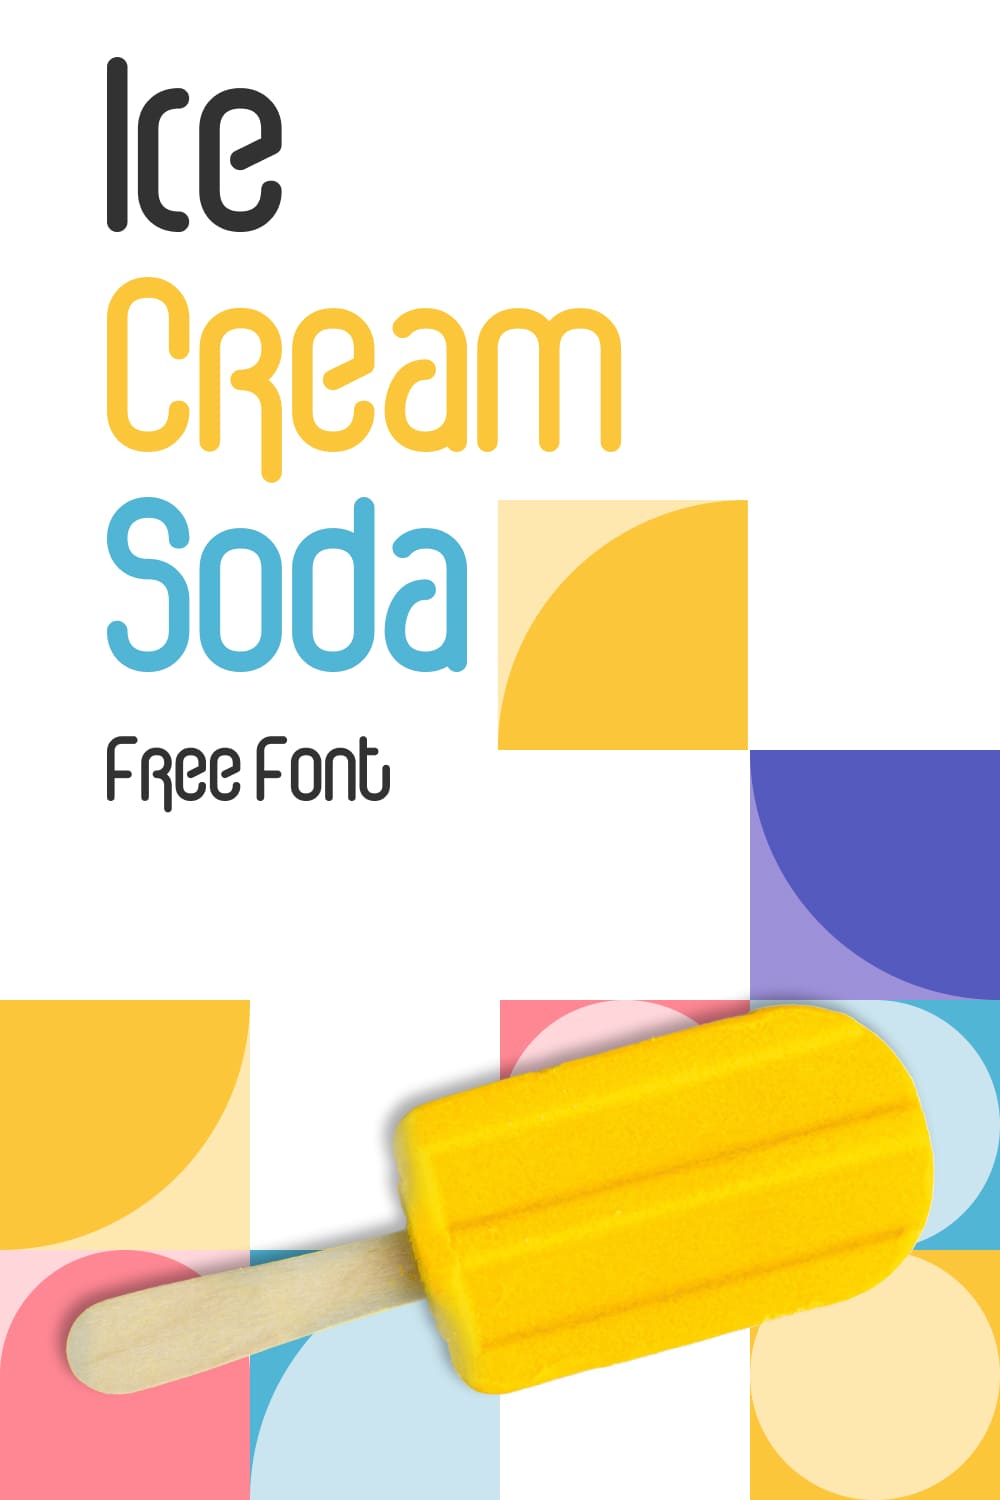 Free Ice Cream Soda Font Colorful Pinterest Preview by MasterBundles.